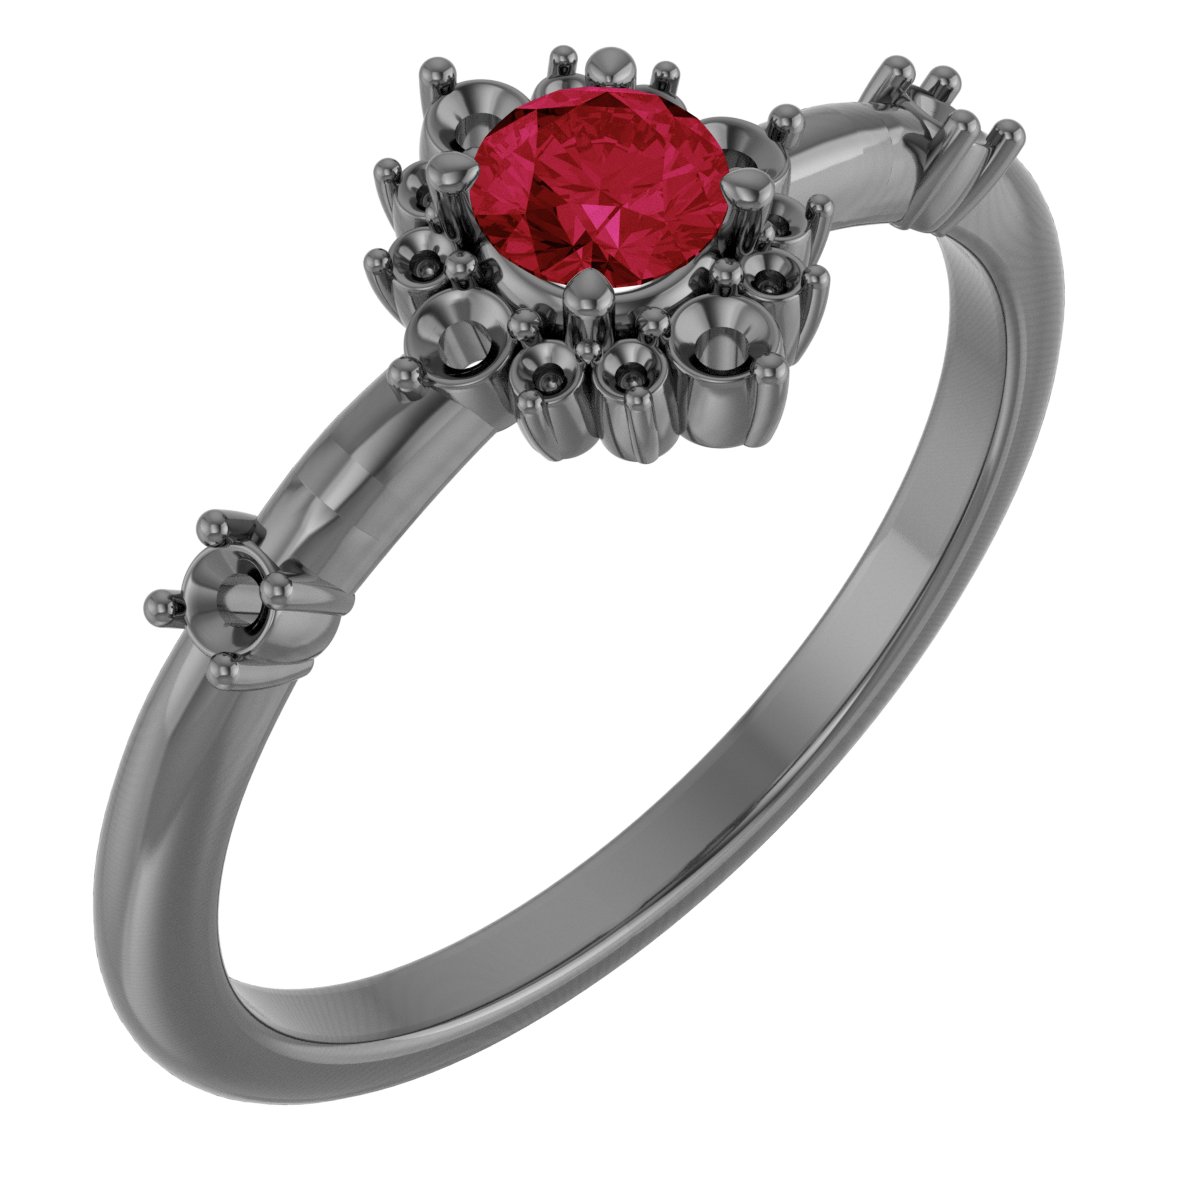 14K Rose Chatham Created Ruby and .167 CTW Diamond Ring Ref. 15641447